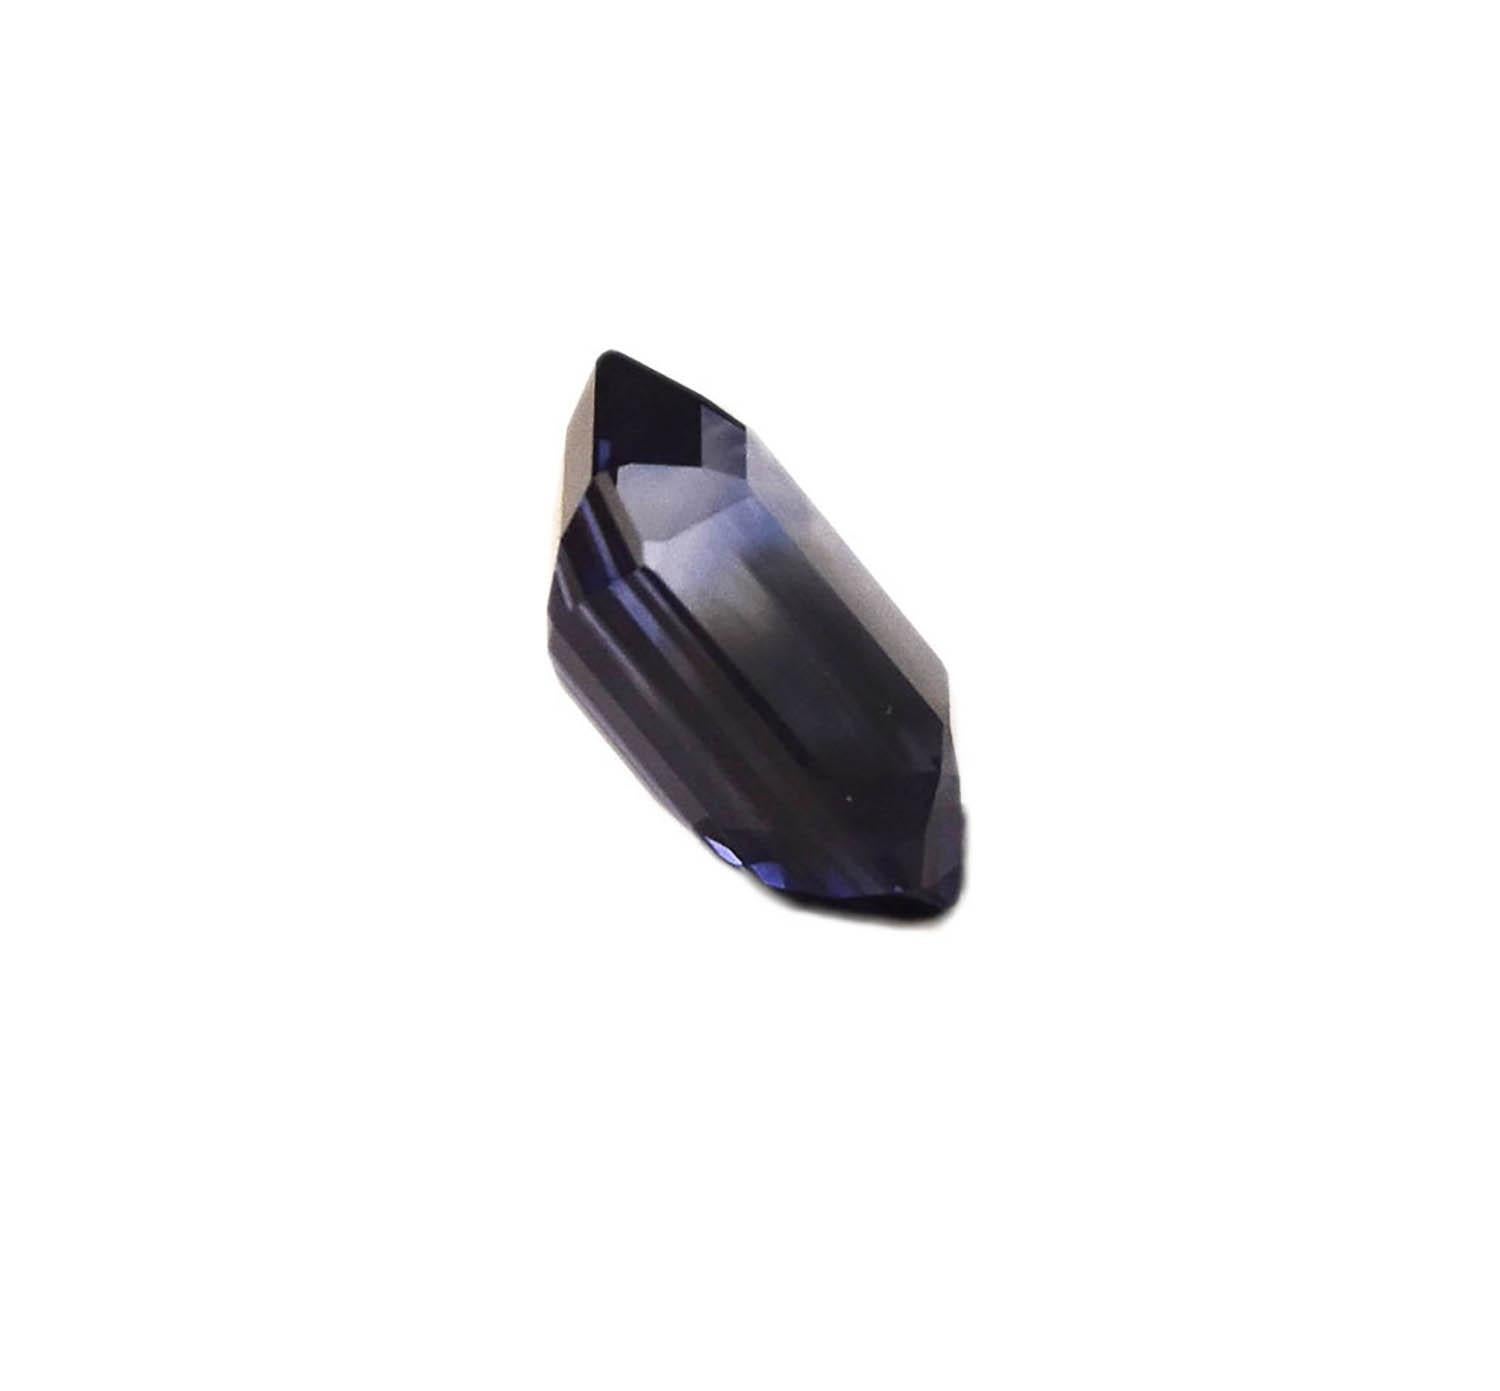 Carat Weight: Approx. 8.06 carat

Color: Blue

Transparency: Transparent

Provenance: Madagascar

Treatment: Heated

Shape and Cutting Style: Octagonal Step Cut 

Species: Natural Corundum

Report: GIA

Measurements: 12.82 x 9.08 x 6.55 mm 

Total